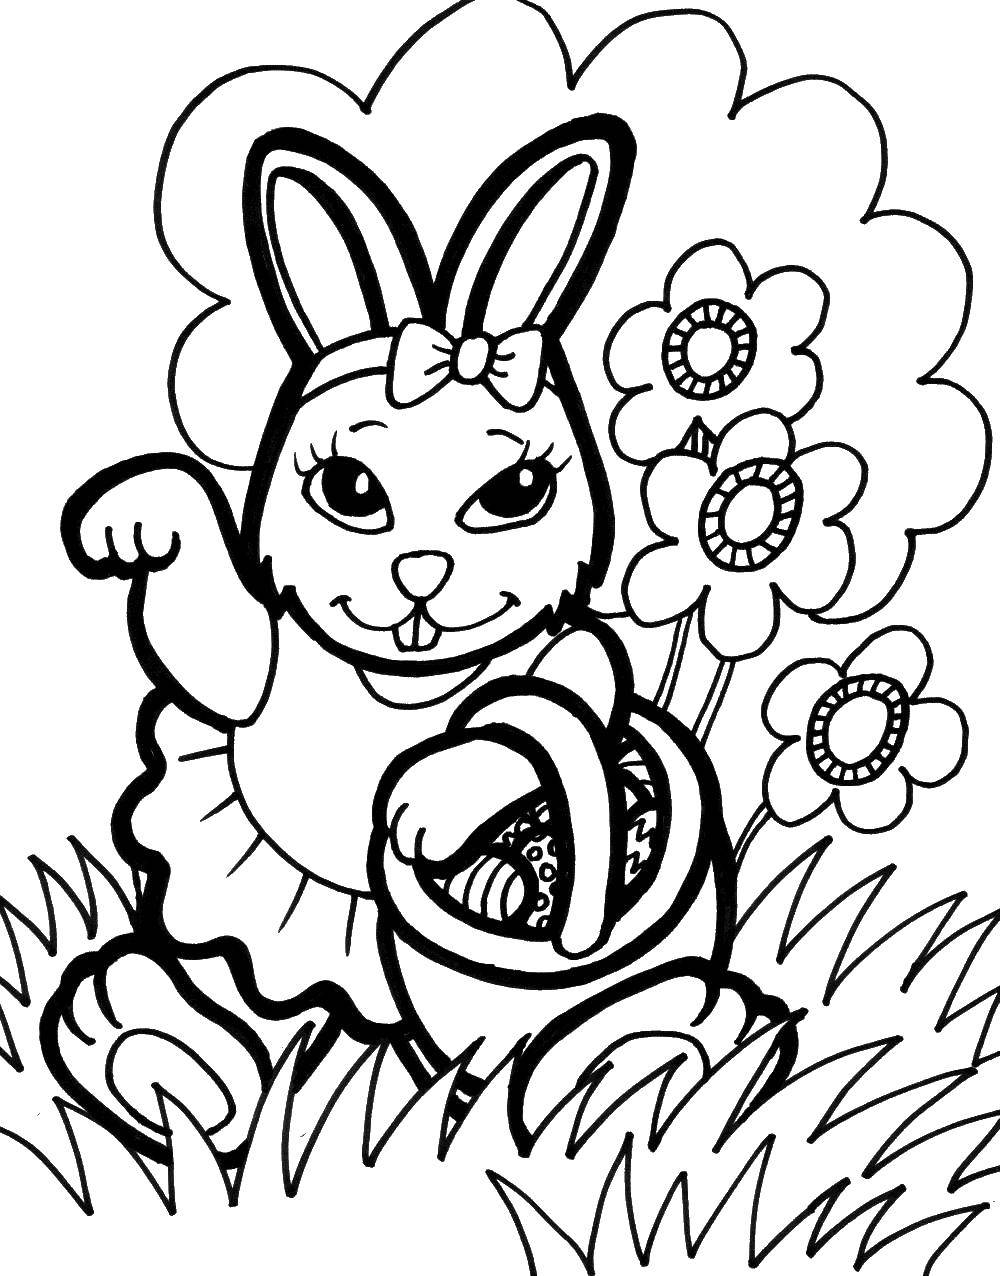 Coloring Rabbit with Easter eggs. Category the rabbit. Tags:  rabbit, hare.